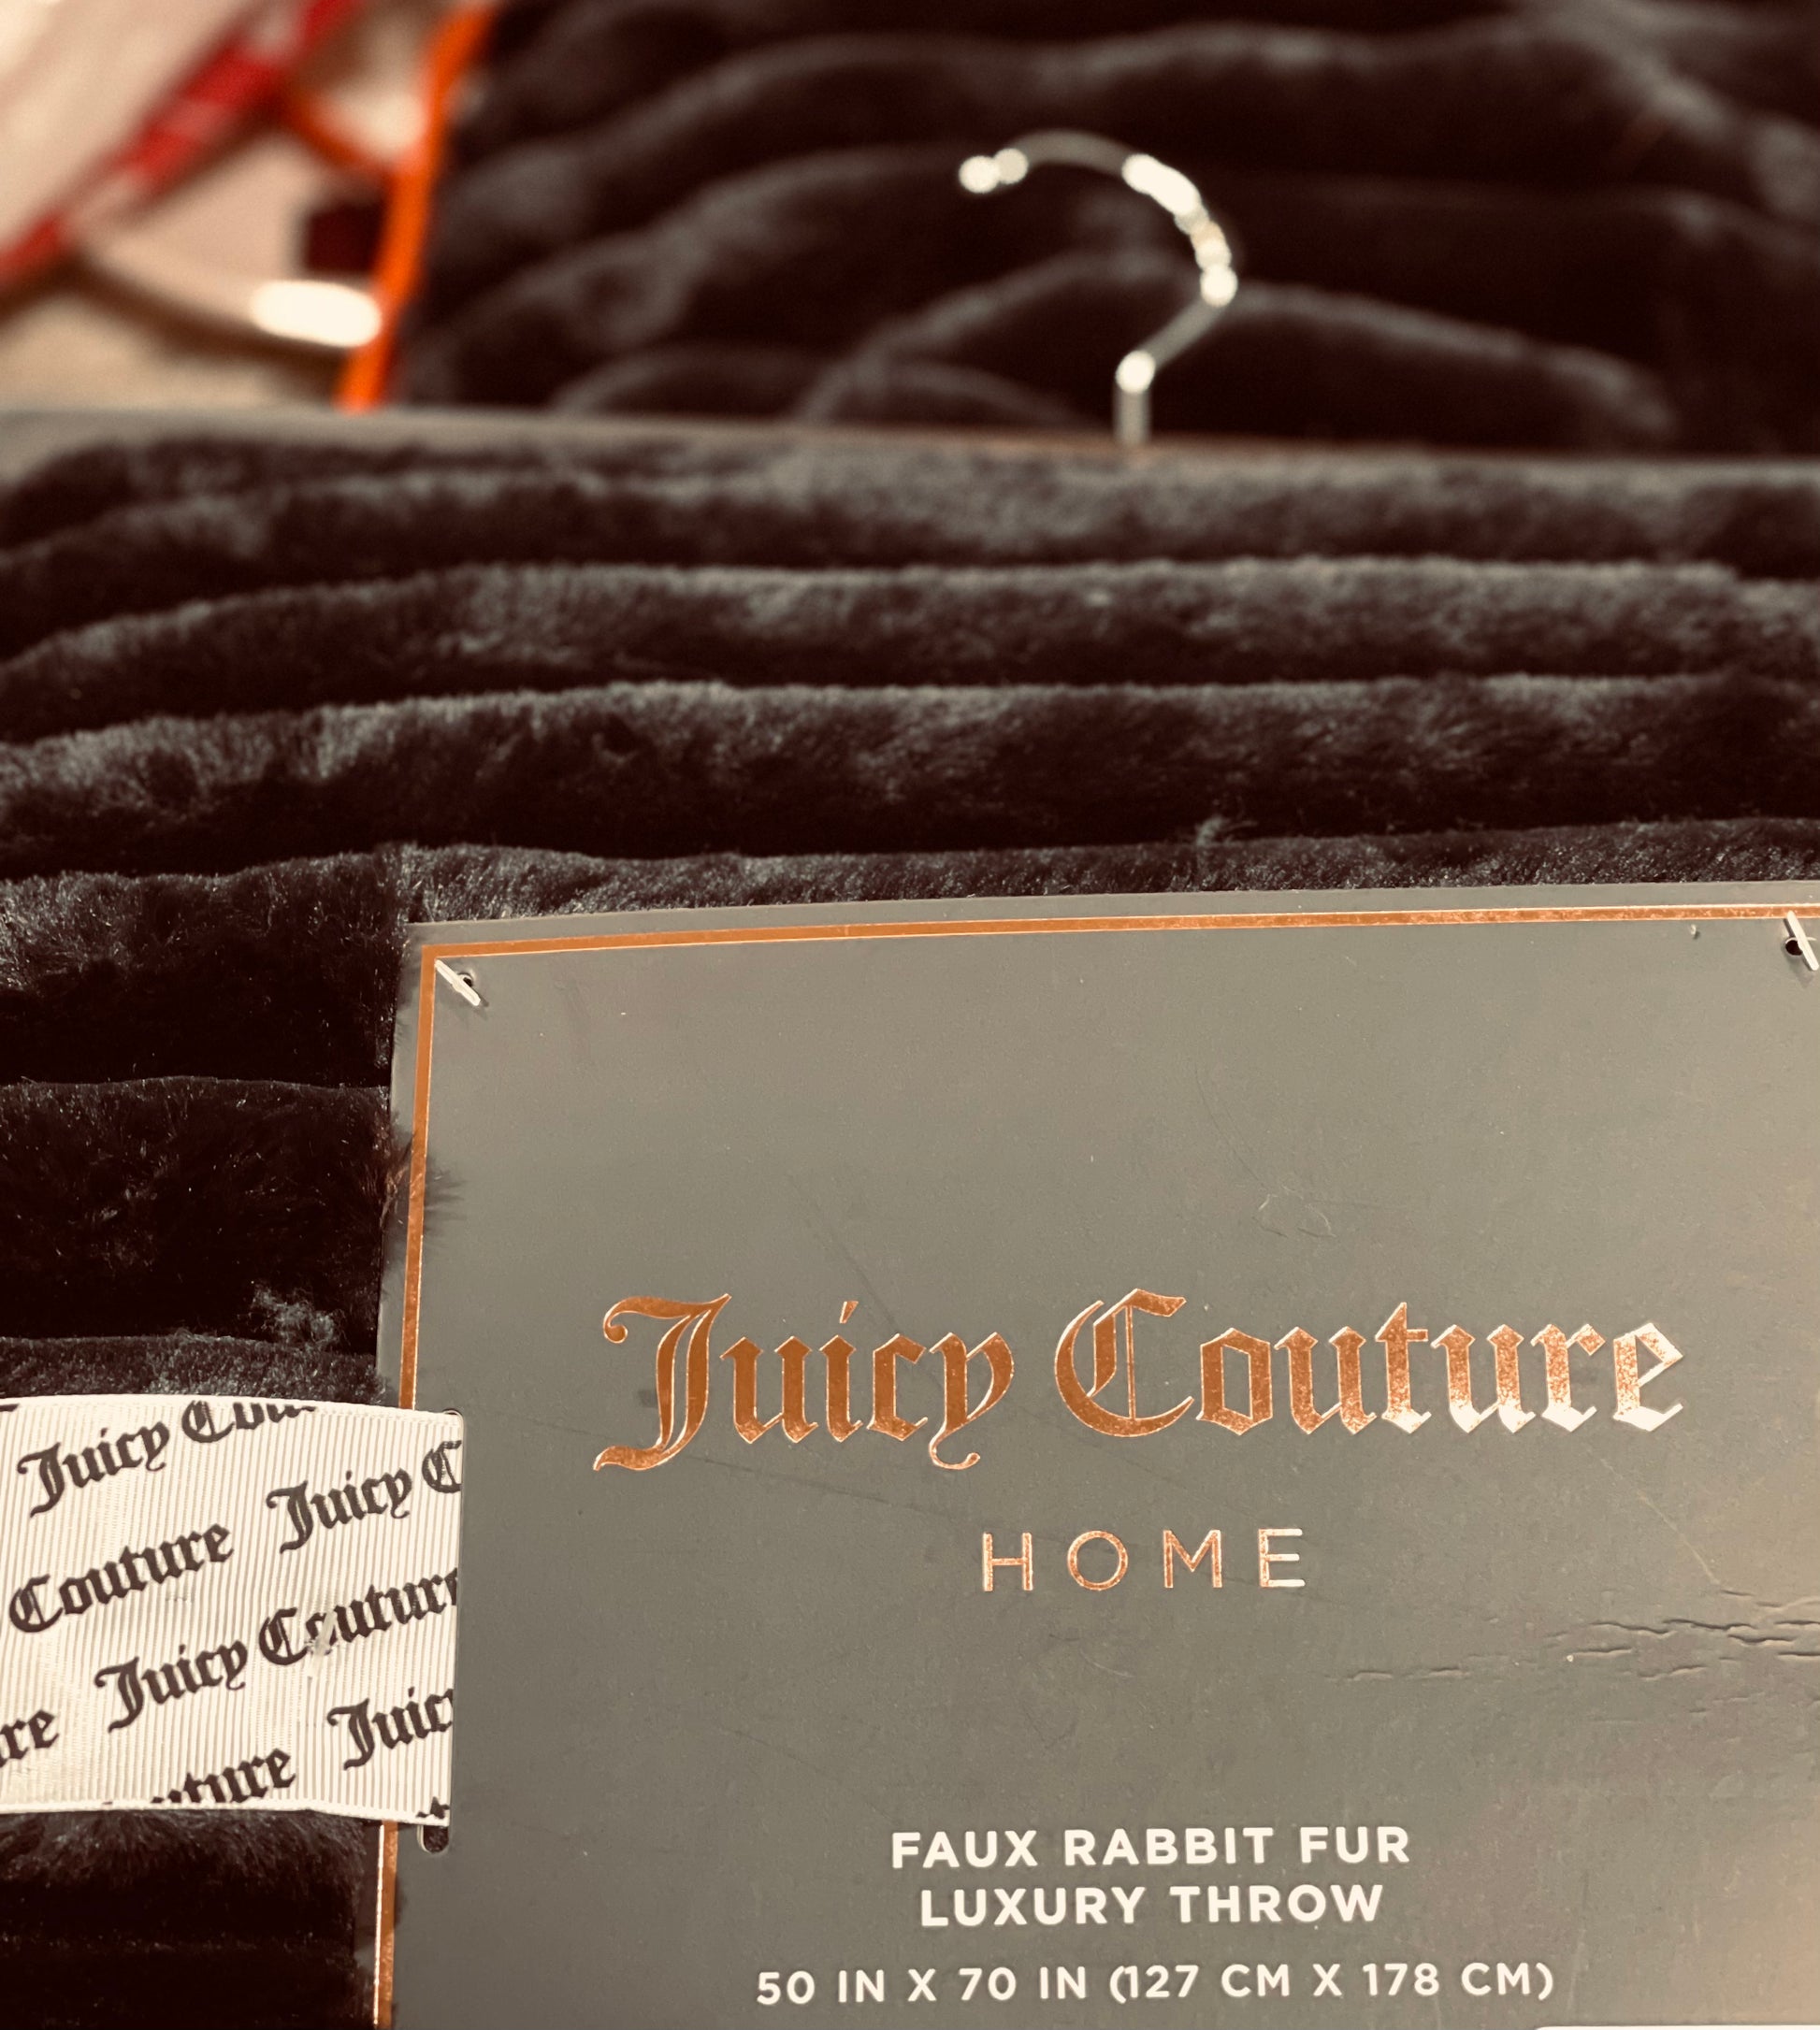 New luxurious Juicy Couture black faux rabbit fur throw blanket